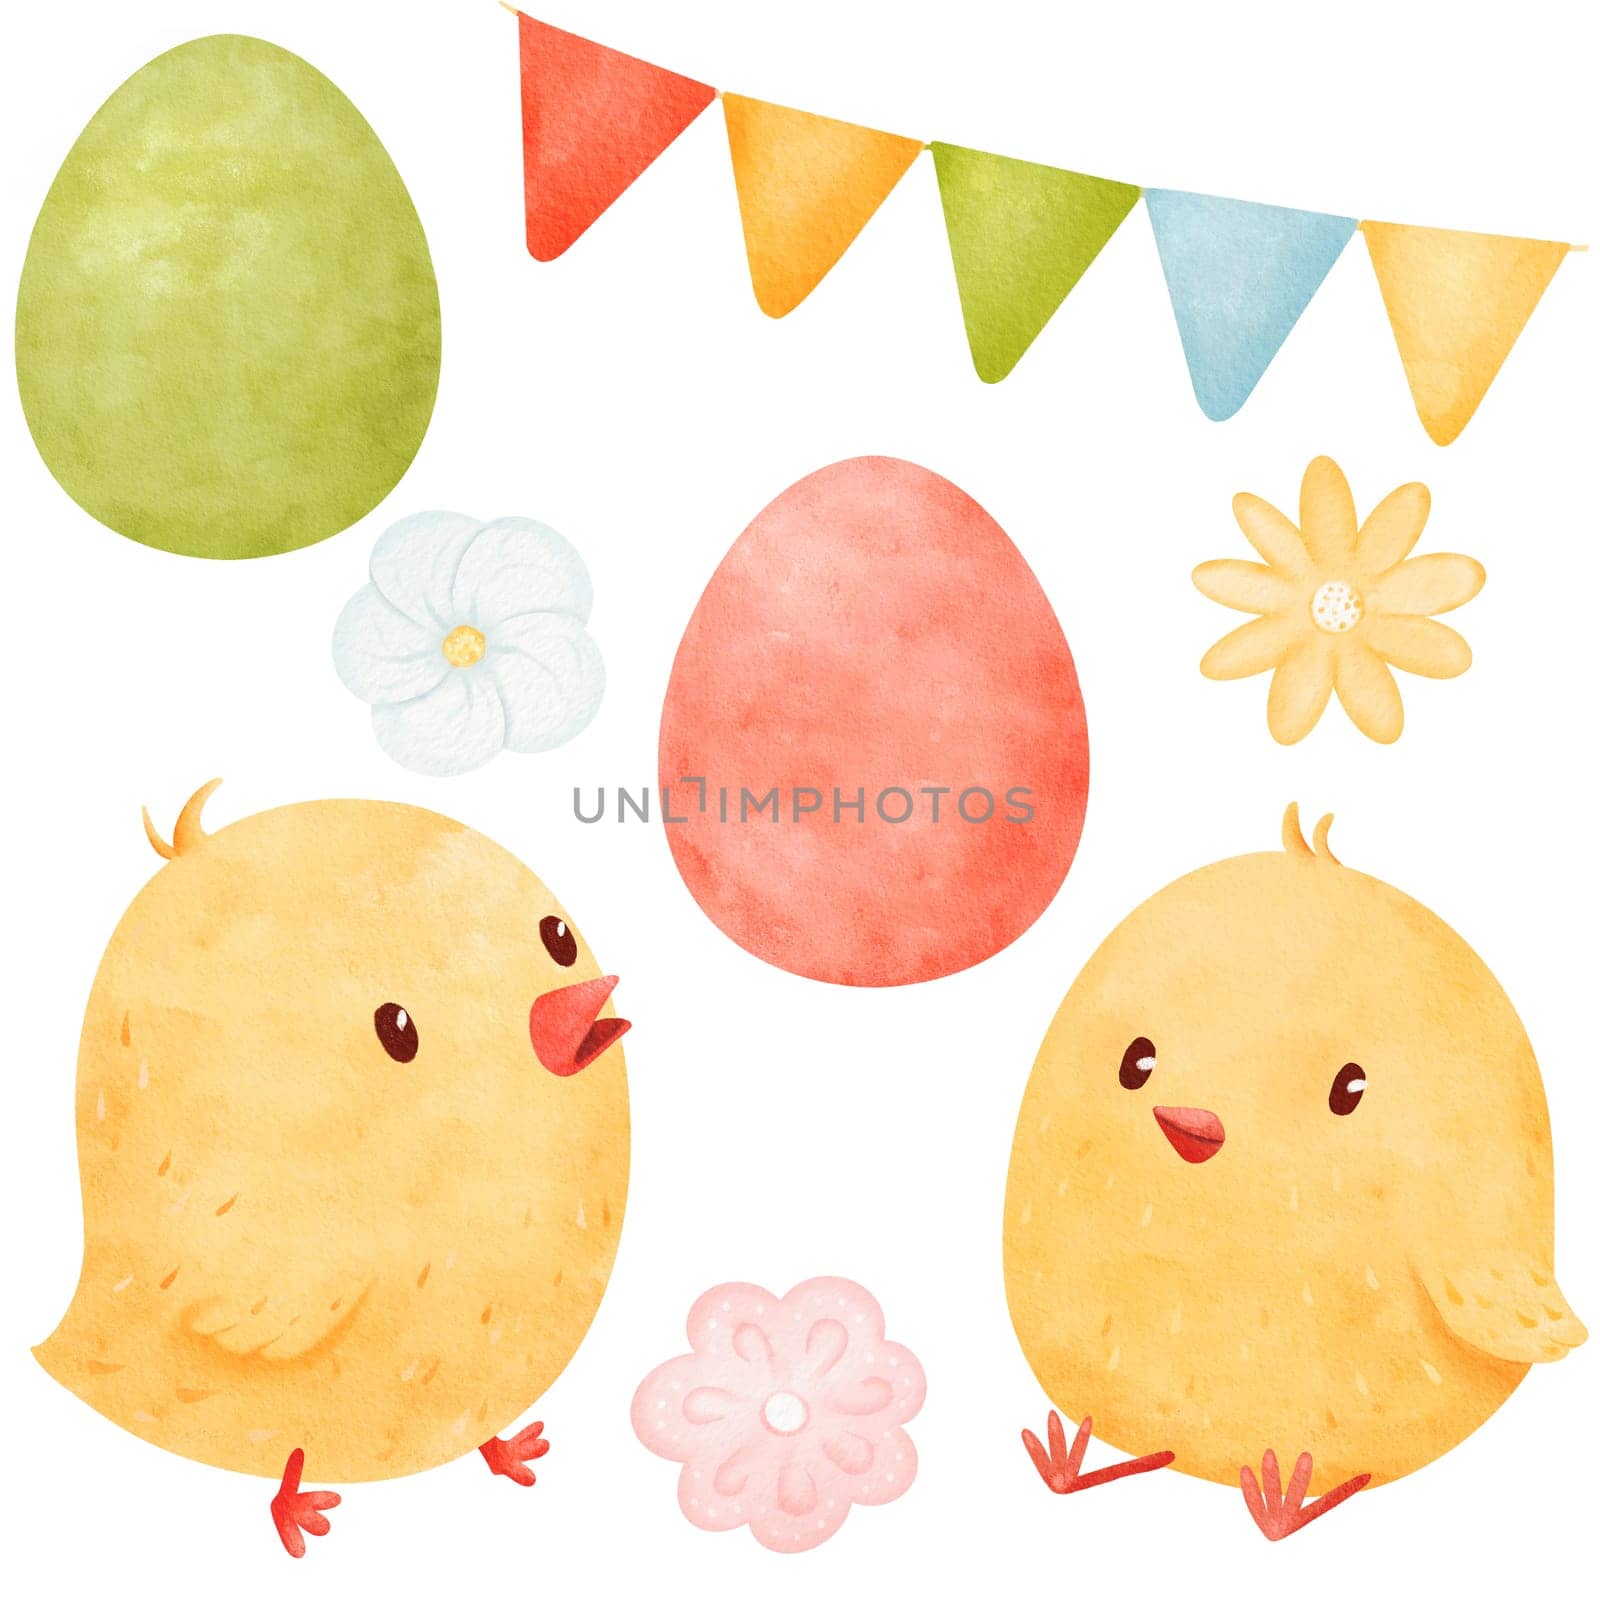 watercolor set. adorable chicks, vibrantly colored eggs, spring flowers, and a birthday garland. cartoon style. for various creative projects. From Easter-themed illustrations to festive designs by Art_Mari_Ka